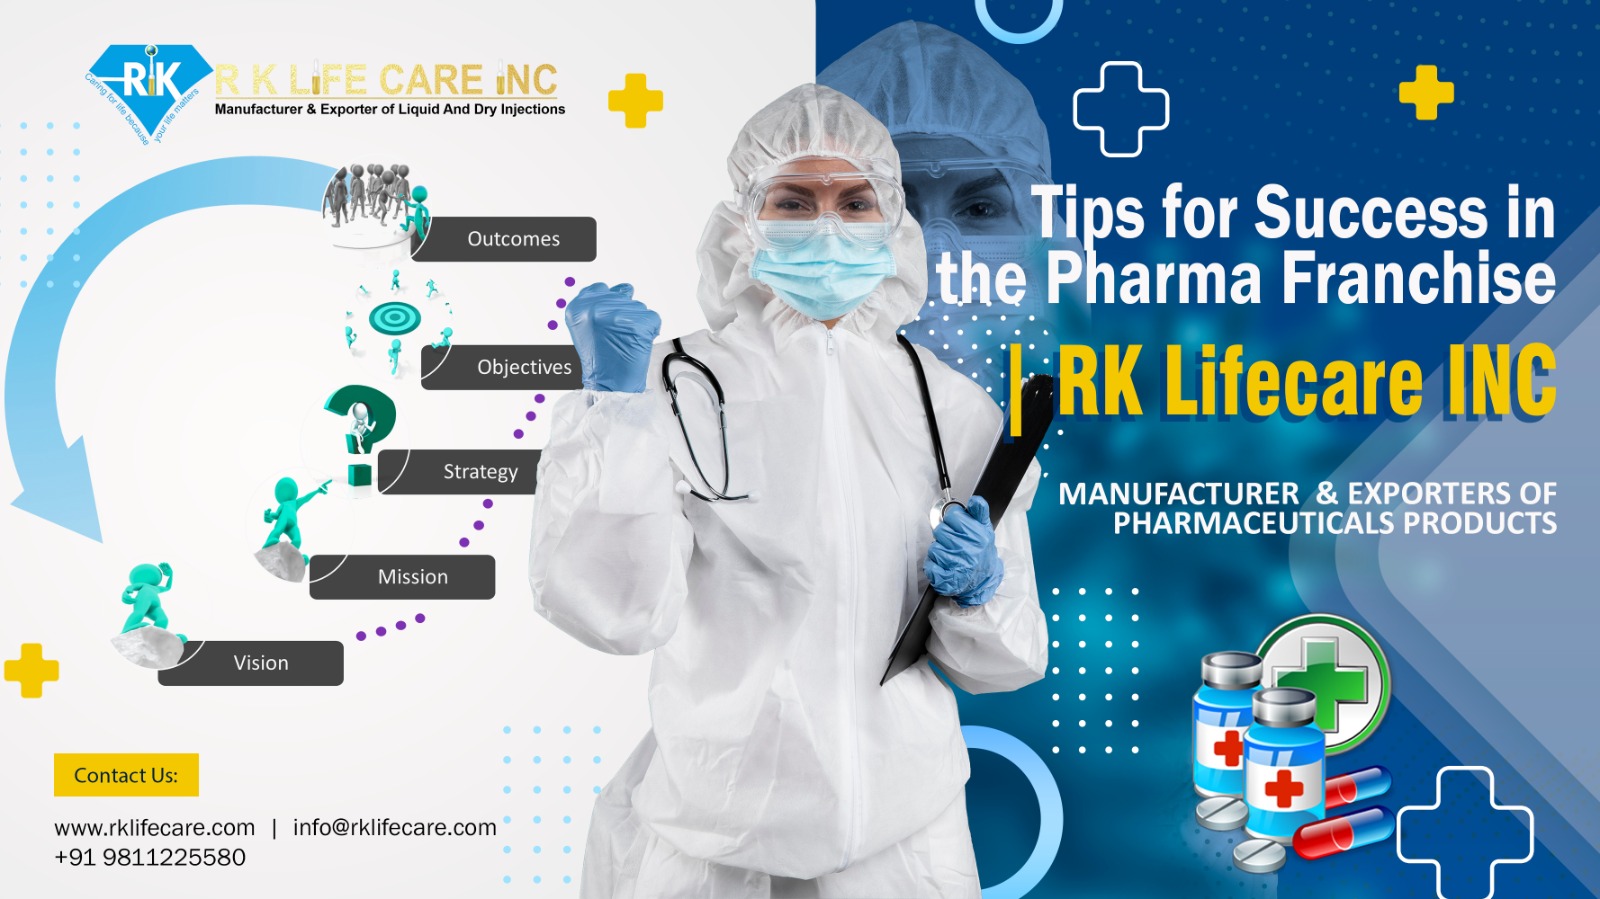 Tips for Success in the Pharma Franchise | RK Lifecare INC